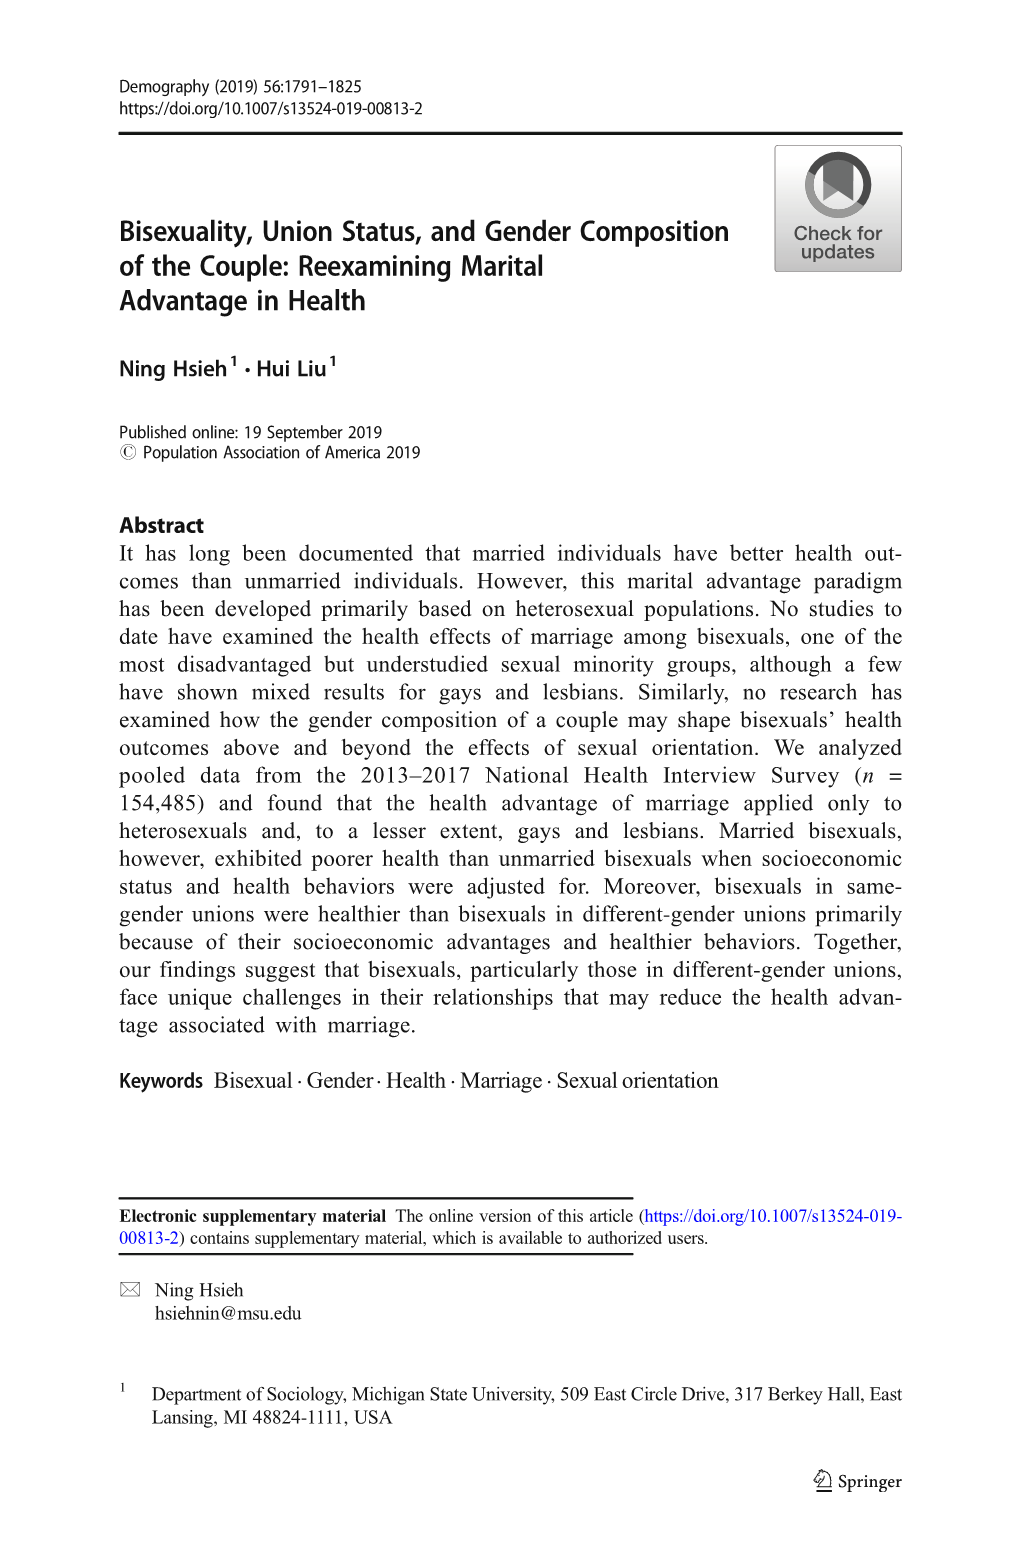 Bisexuality, Union Status, and Gender Composition of the Couple: Reexamining Marital Advantage in Health